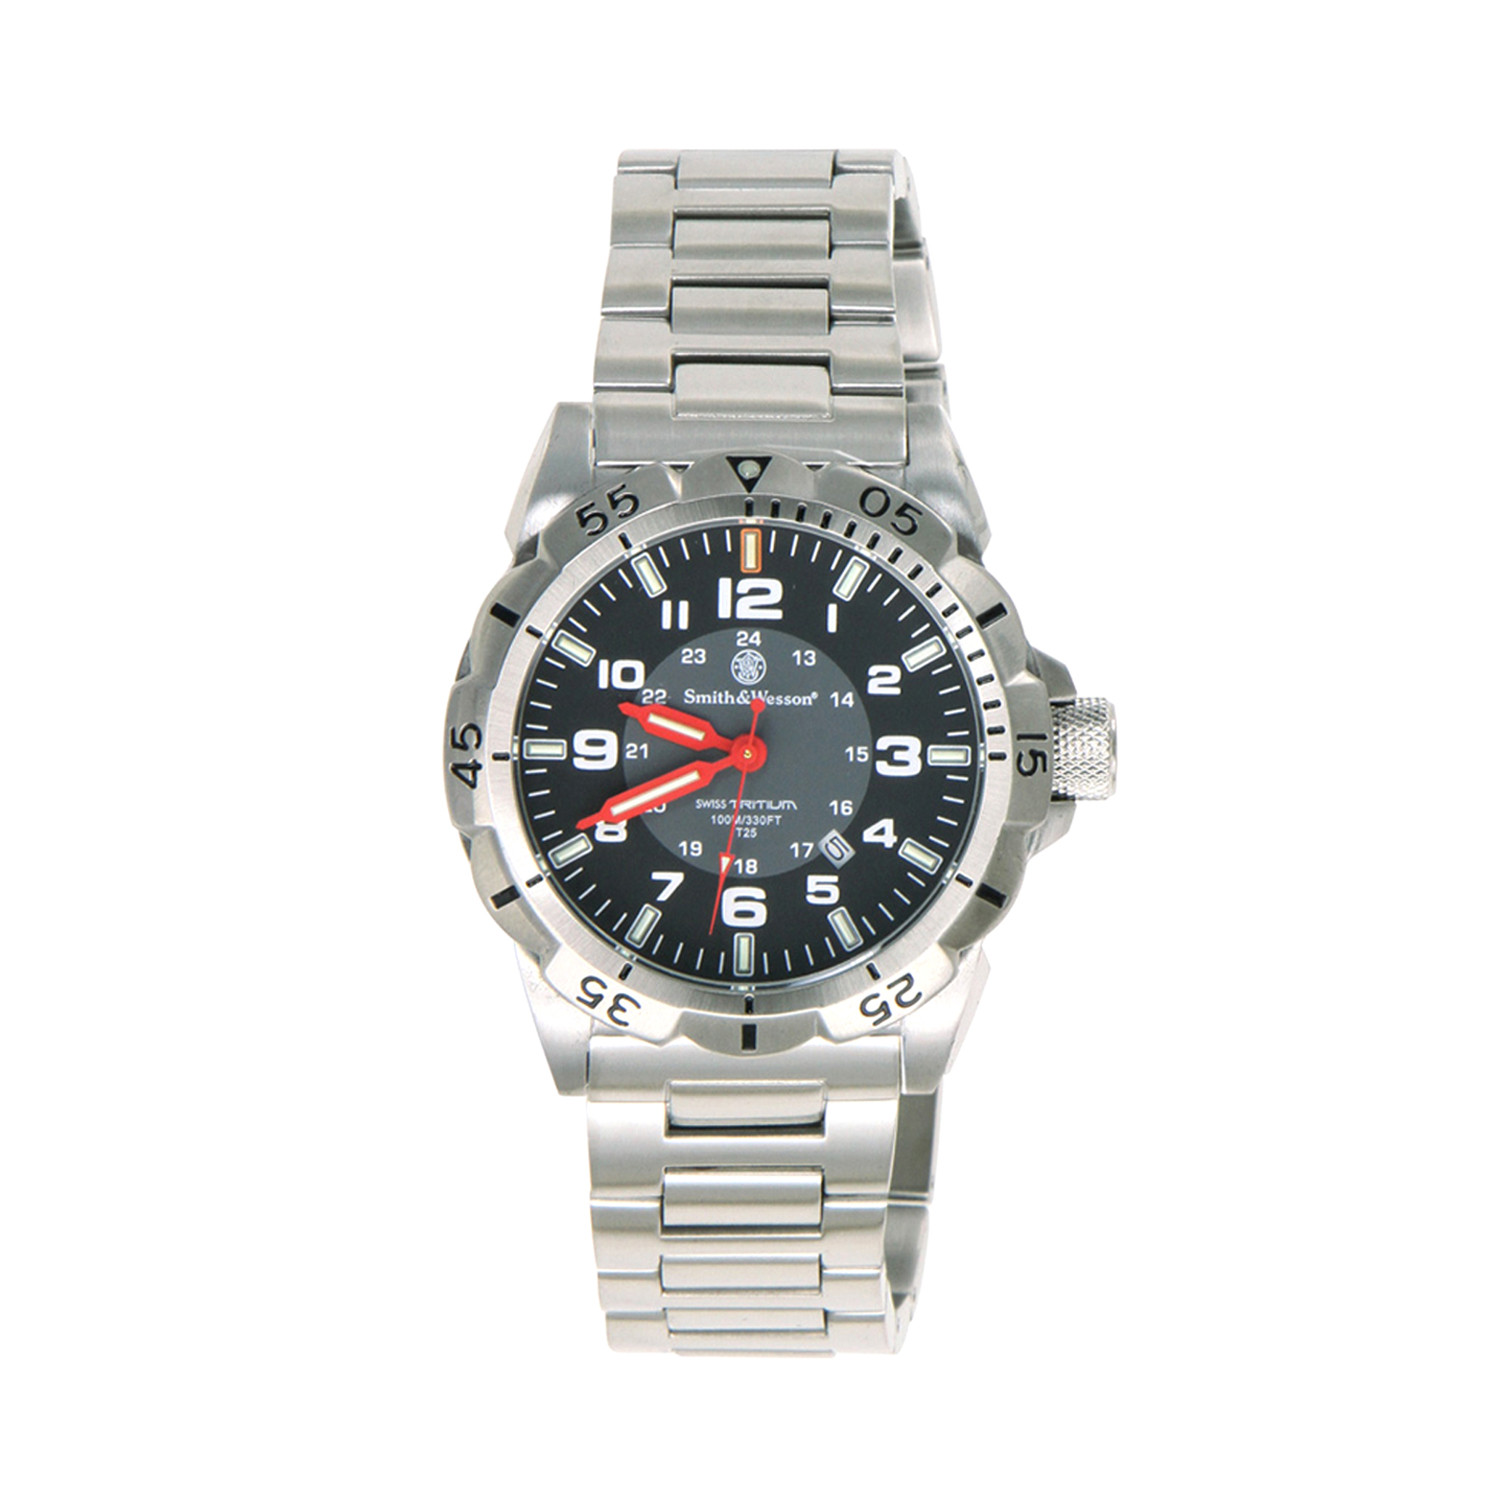 Smith & Wesson Men's SWW-88-S Emissary Tritium Watch - Campco - Touch ...